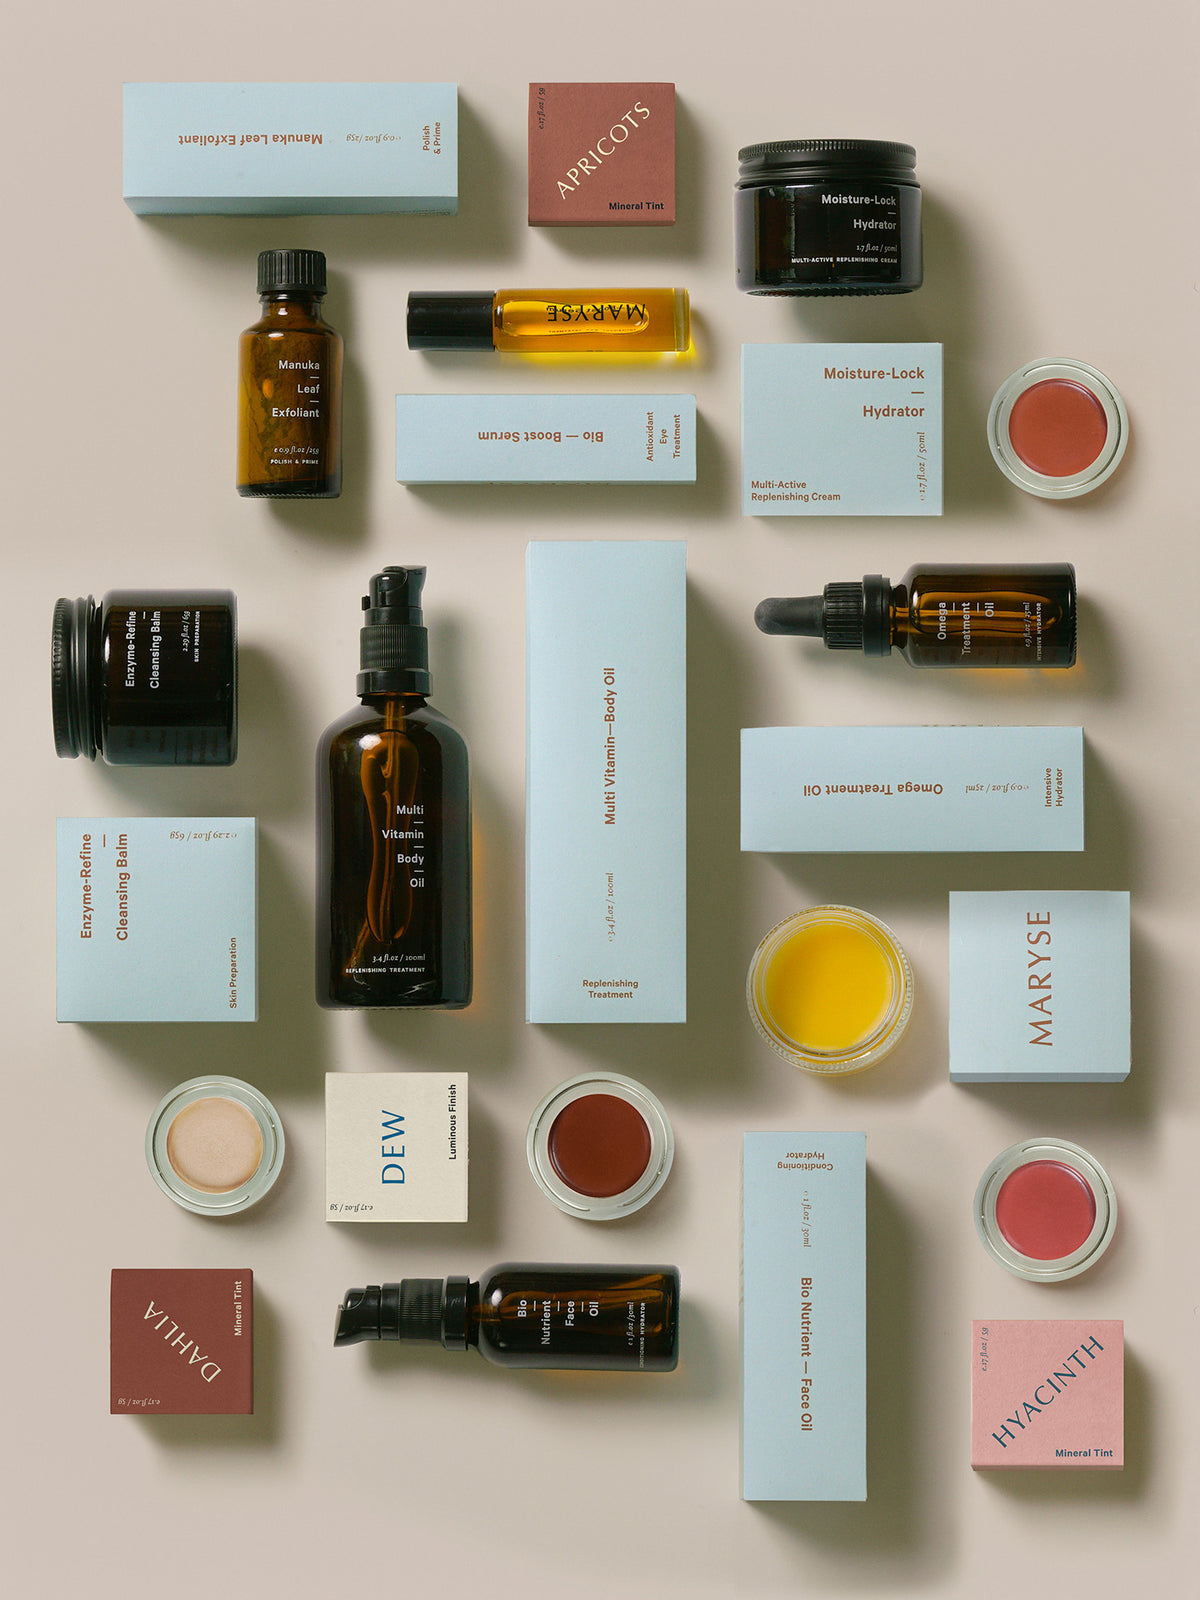 A collection of MARYSE Moisture-Lock – Hydrator products arranged on a white surface.